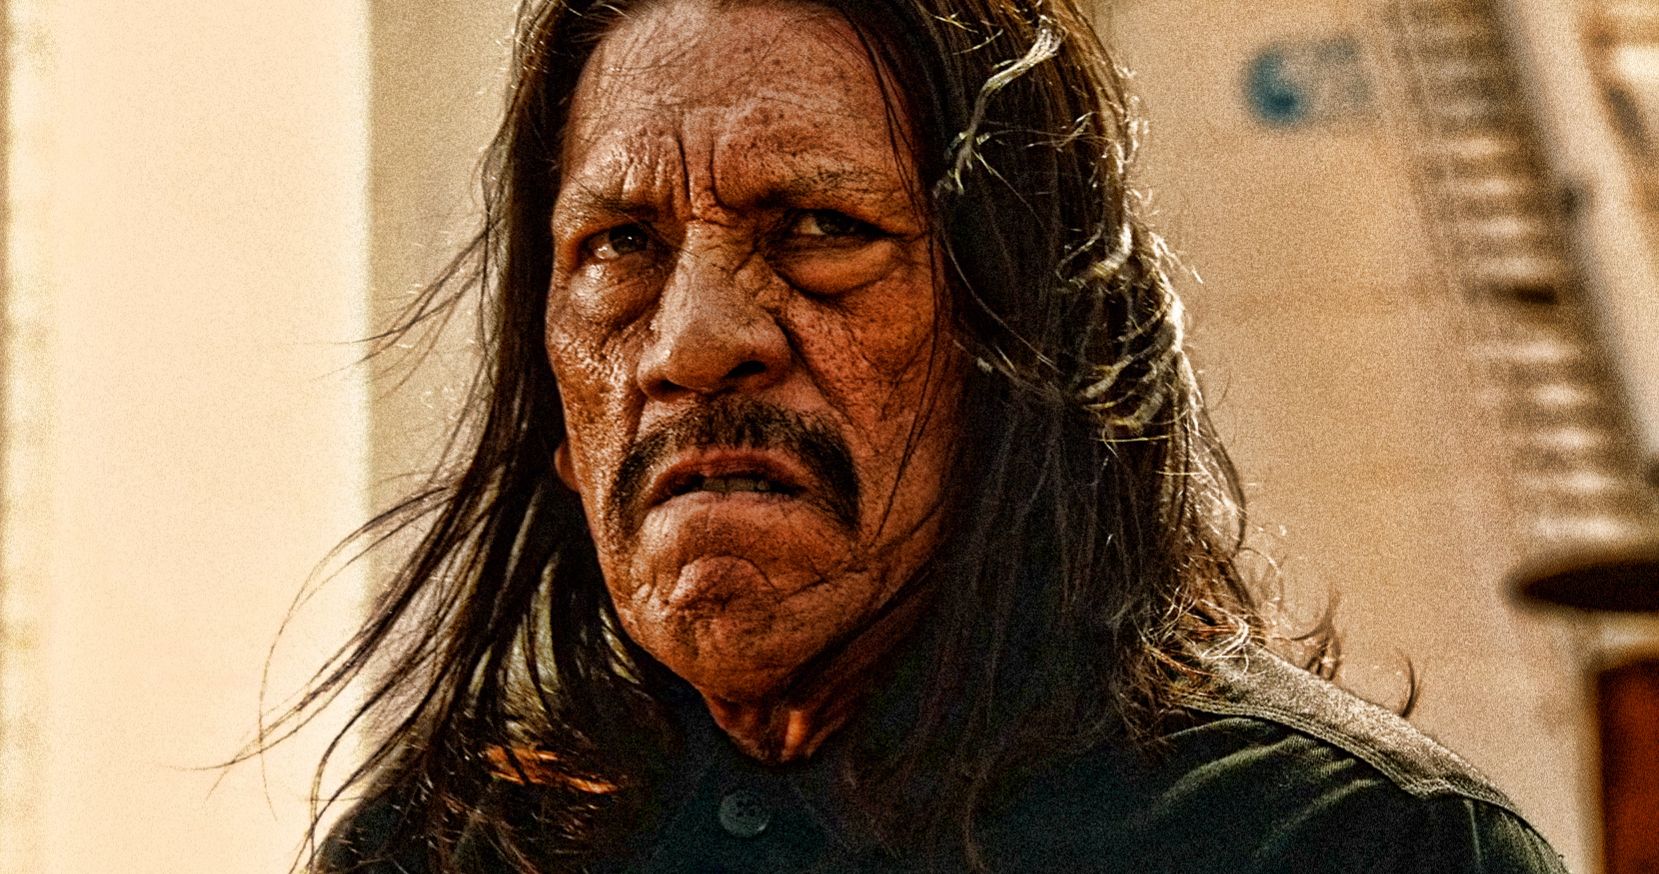 Watch Danny Trejo Become a Real-Life Hero as He Rescues Kid in New Security Video